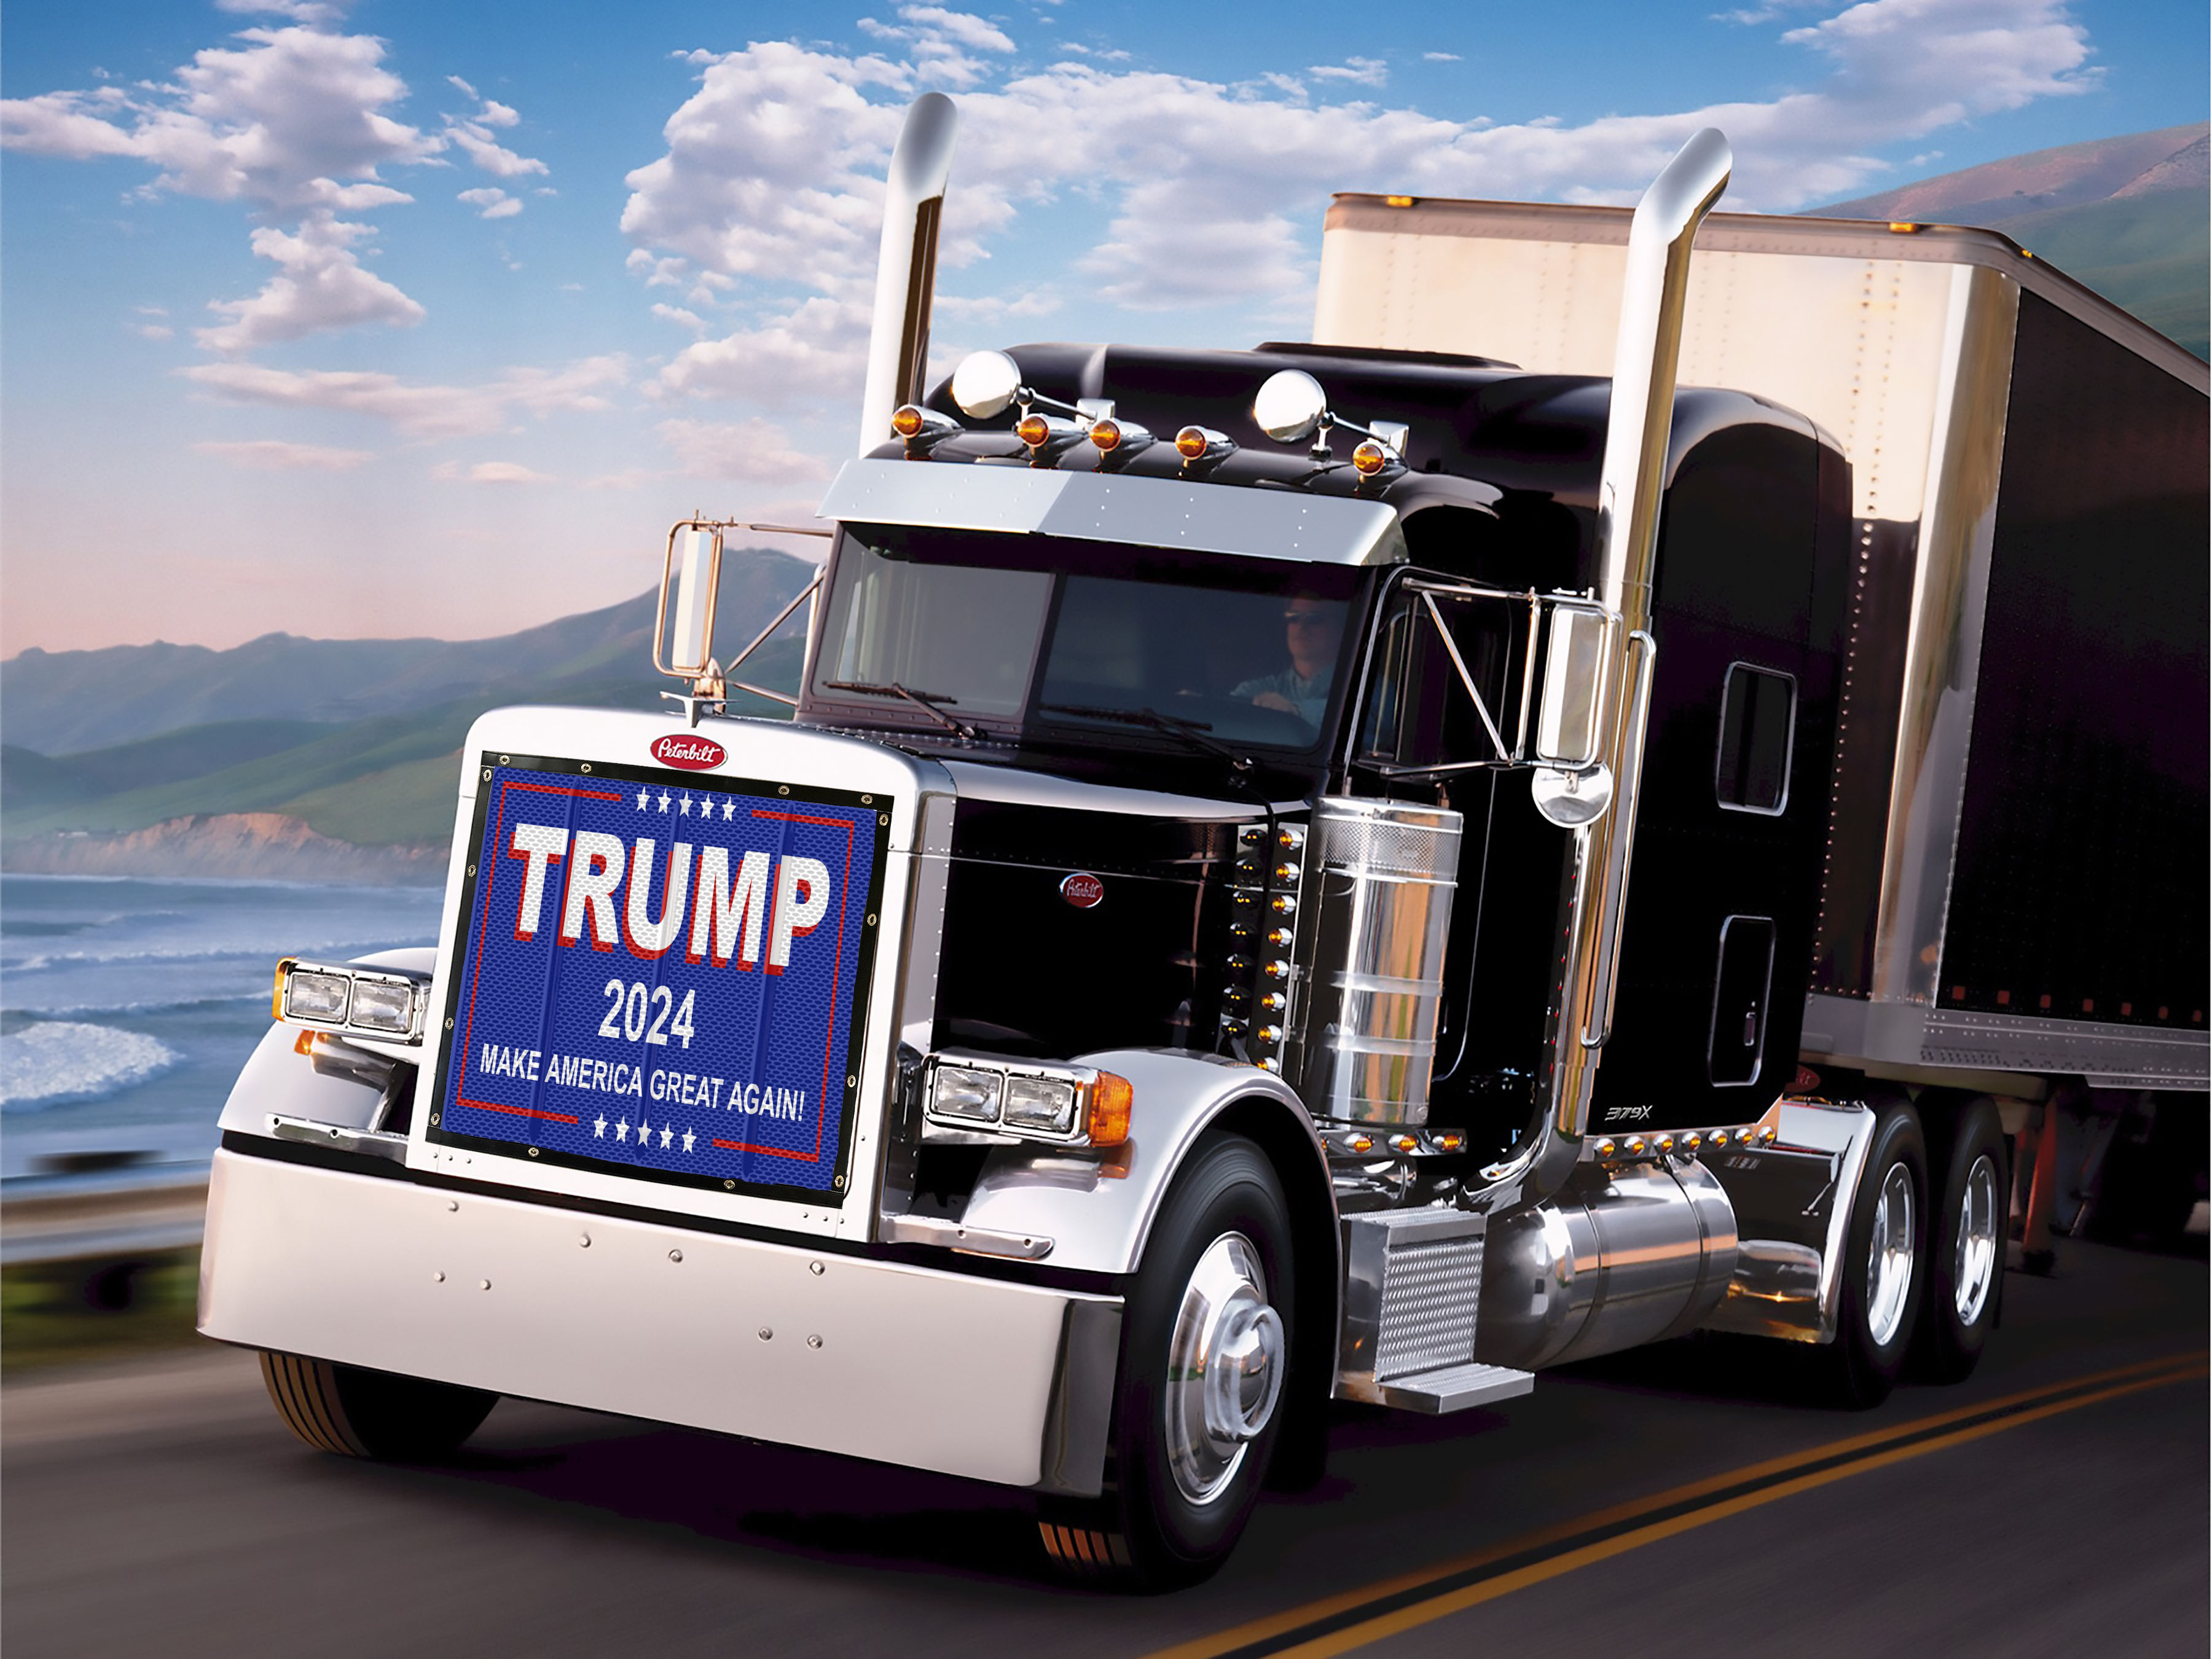 A black semi-truck with a Bug Screen: Trump 2024 campaign sign on the front grille driving on a road with a mountainous landscape in the background.